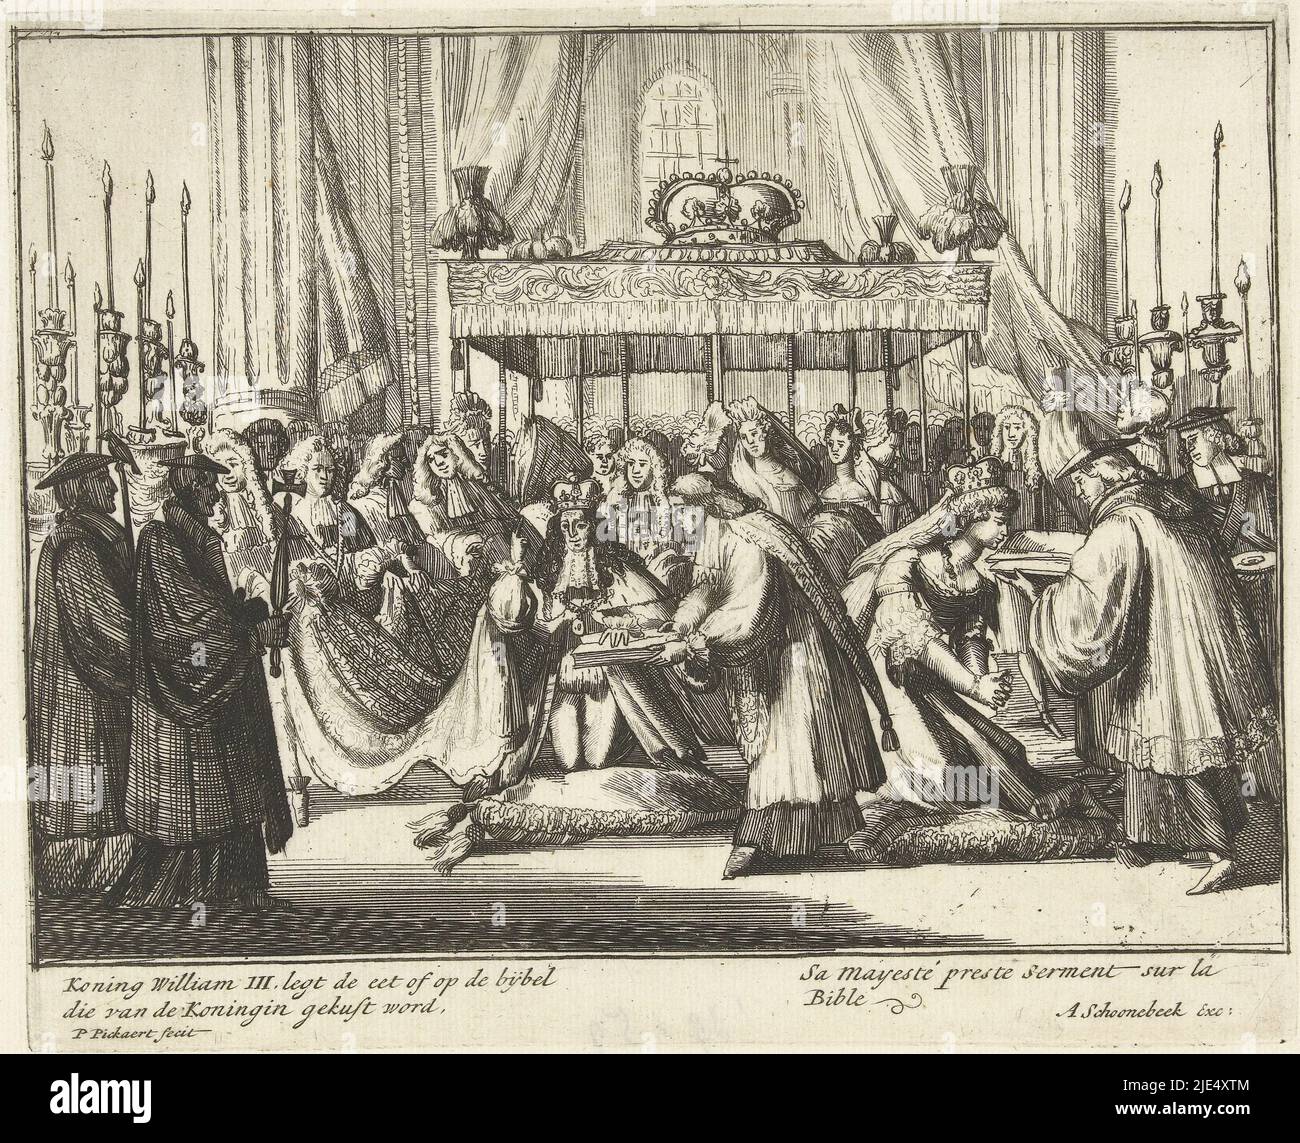 During the coronation ceremony, William III takes the oath on the Bible, Mary kisses the Bible, April 21, 1689. Part of the series 'Engelants schouwtoneel' on the Glorious Revolution 1688-1689 (second part). With captions in Dutch and French, William III takes the oath during the coronation, 1689 King William III takes the oath on the bible that is kissed from the Queen, Englishman's spectacle depicts the Glorious surpassed with the crowning of William III and Mary II to King and Queen of Great Brittany and Vrankryk and Yrlant, etc. II Part. (series title on object), print maker: Pieter Stock Photo